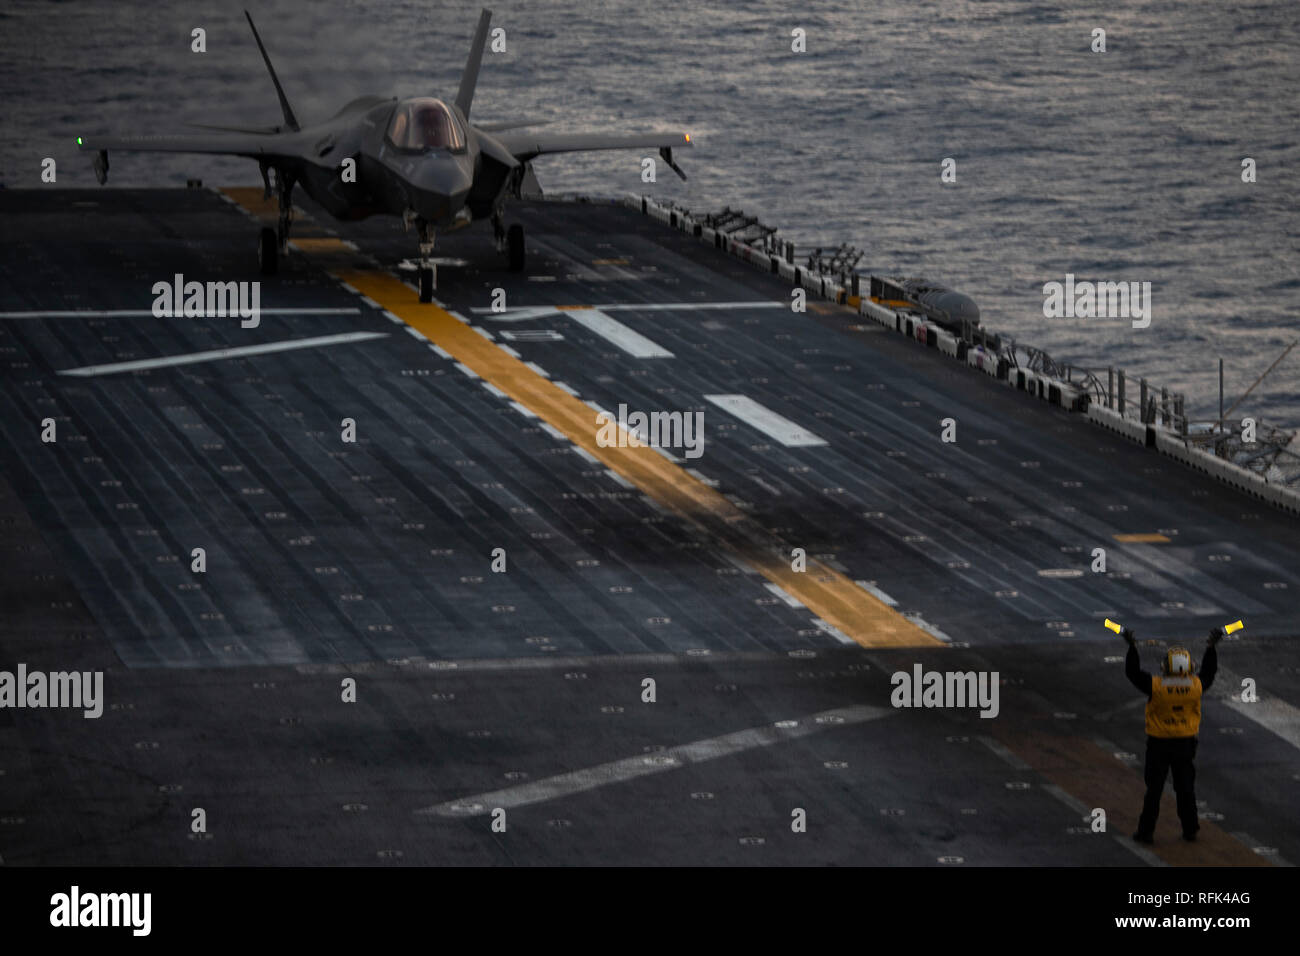 A U.S. Navy aviation boatswain’s mate assigned to the amphibious assault ship USS Wasp (LHD 1) signals an F-35B Lightning II aircraft with Marine Fighter Attack Squadron (VMFA) 121 during flight operations while underway in the East China Sea, Jan. 24, 2019. Aviation boatswain’s mates wear distinctive, bright yellow shirts and use a variety of hand and arm signals to communicate with naval aviators and deck crew during flight operations. Marine Medium Tiltrotor Squadron (VMM) 262 (Reinforced) and VMFA-121 comprise the Aviation Combat Element for the 31st Marine Expeditionary Unit (MEU). Its na Stock Photo